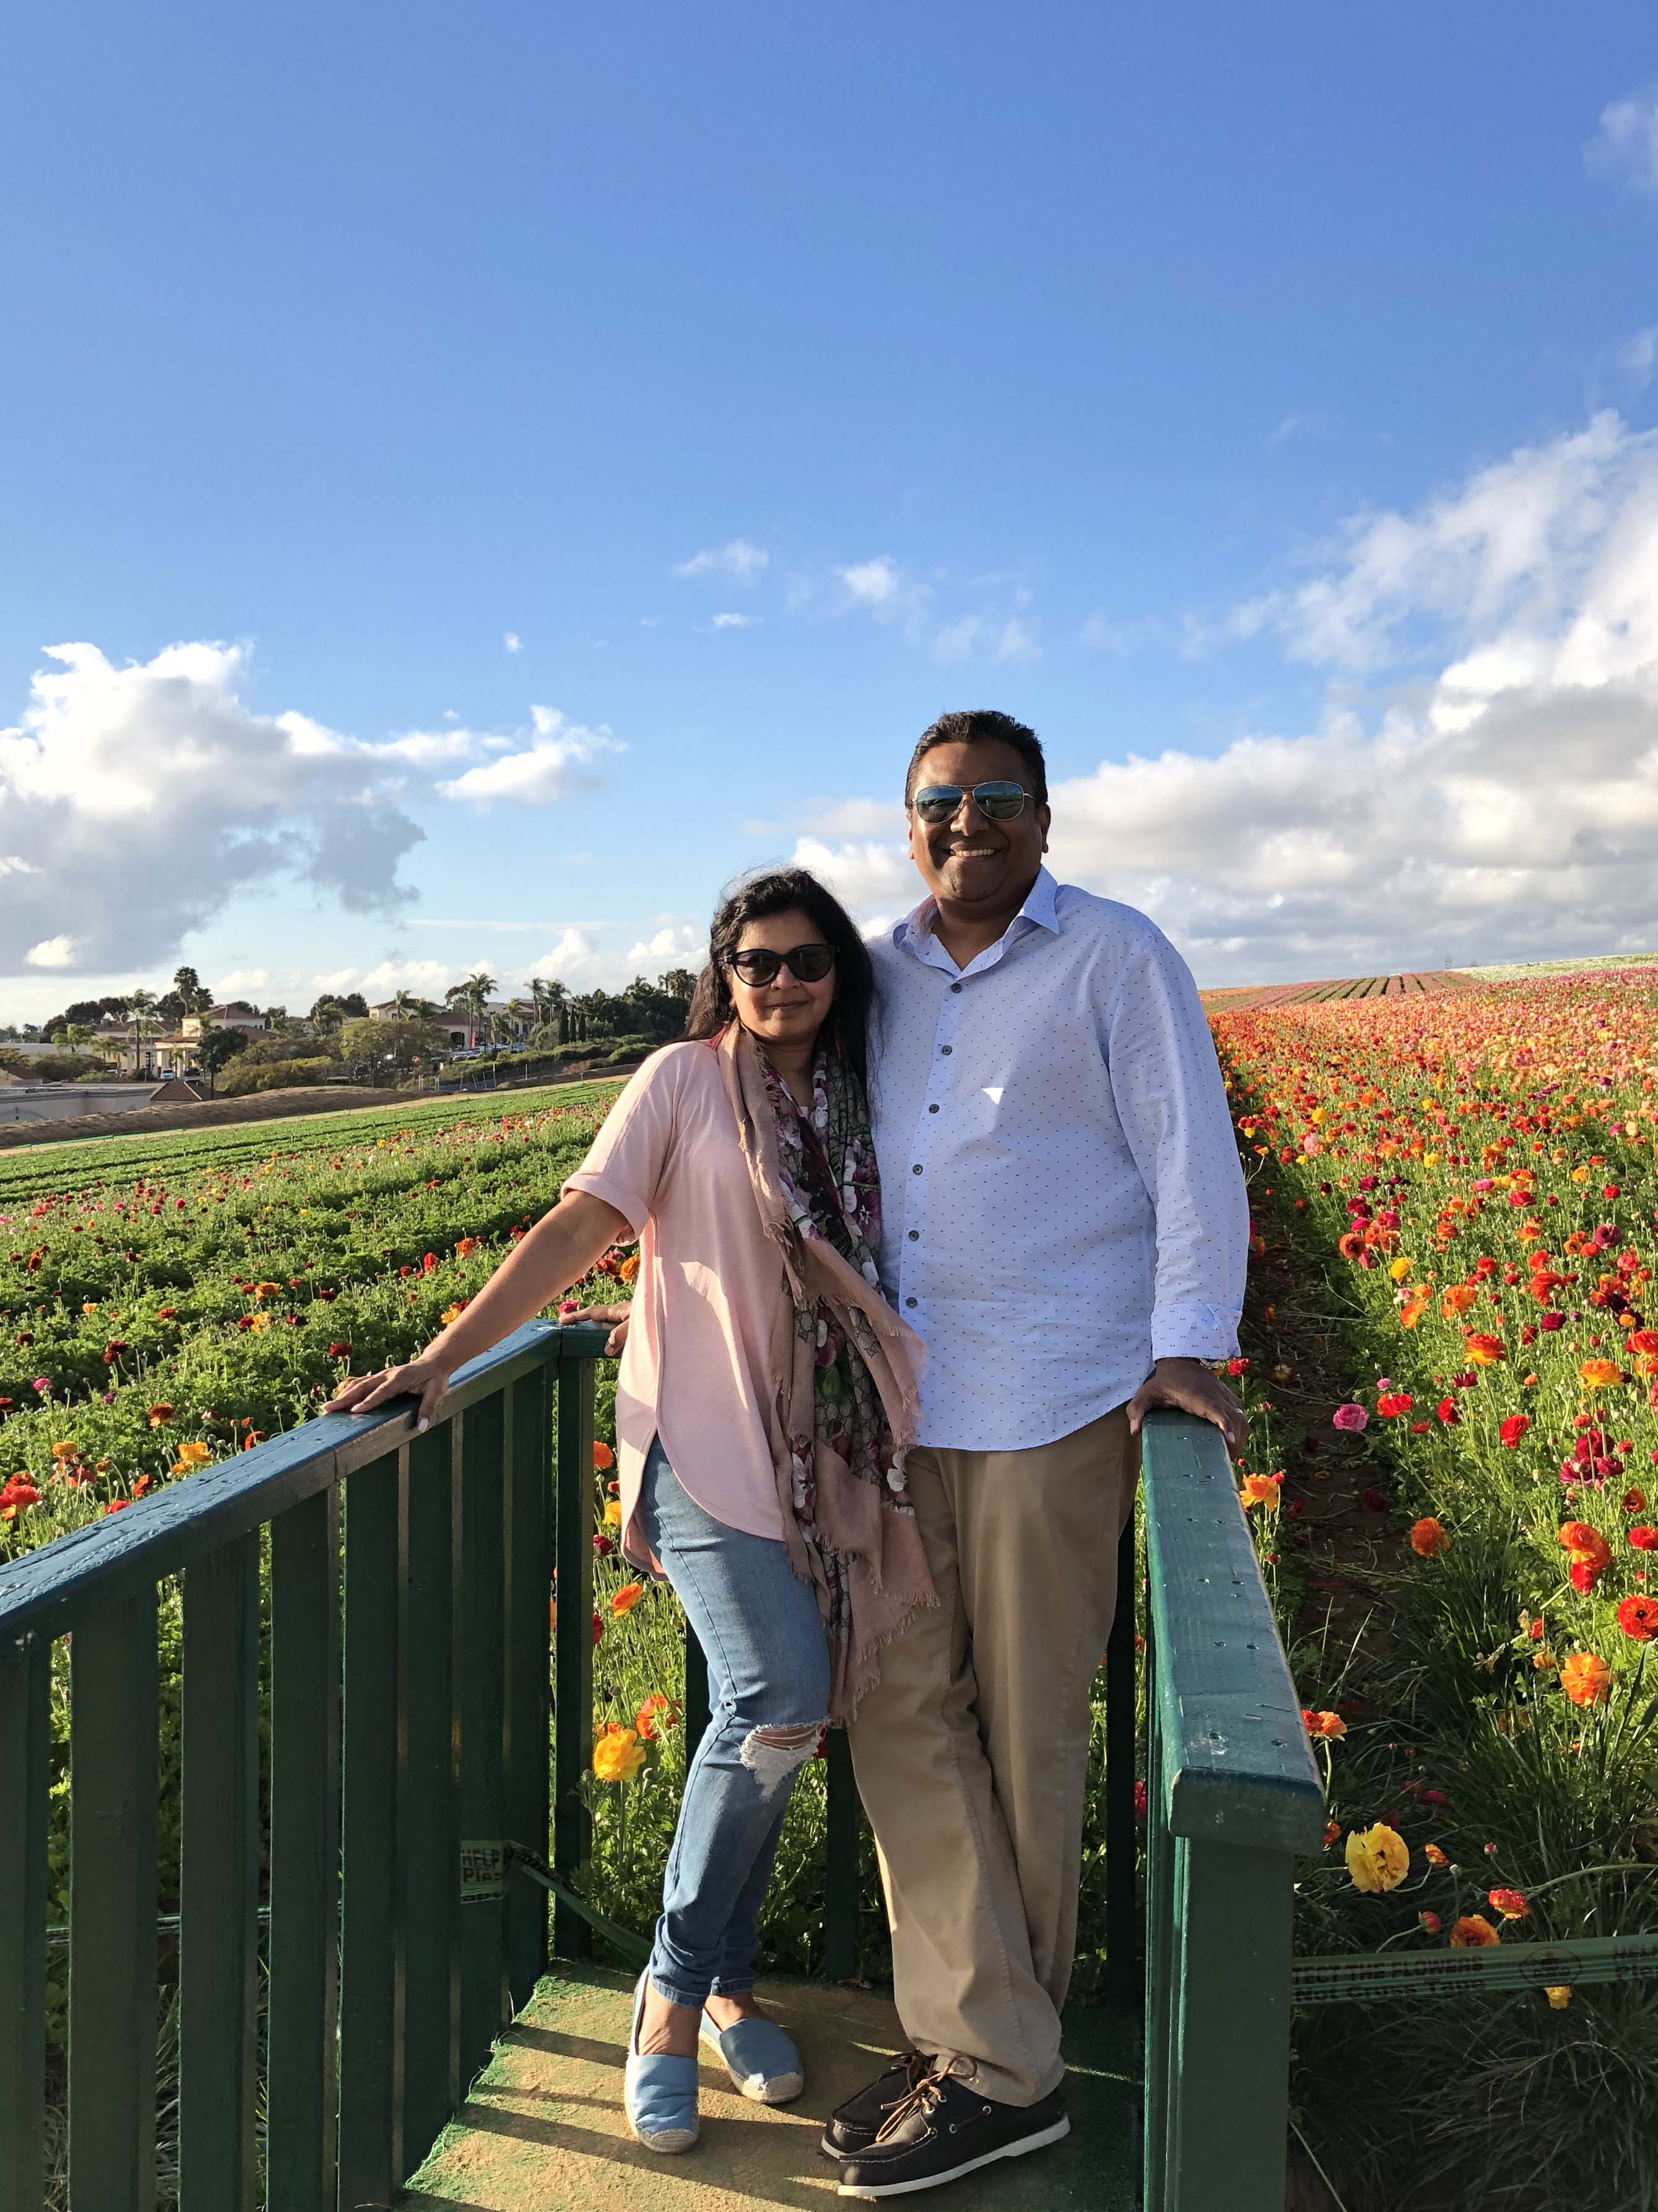 The Flower Fields, Carslbad, San Diego - Photo by Outside Suburbia